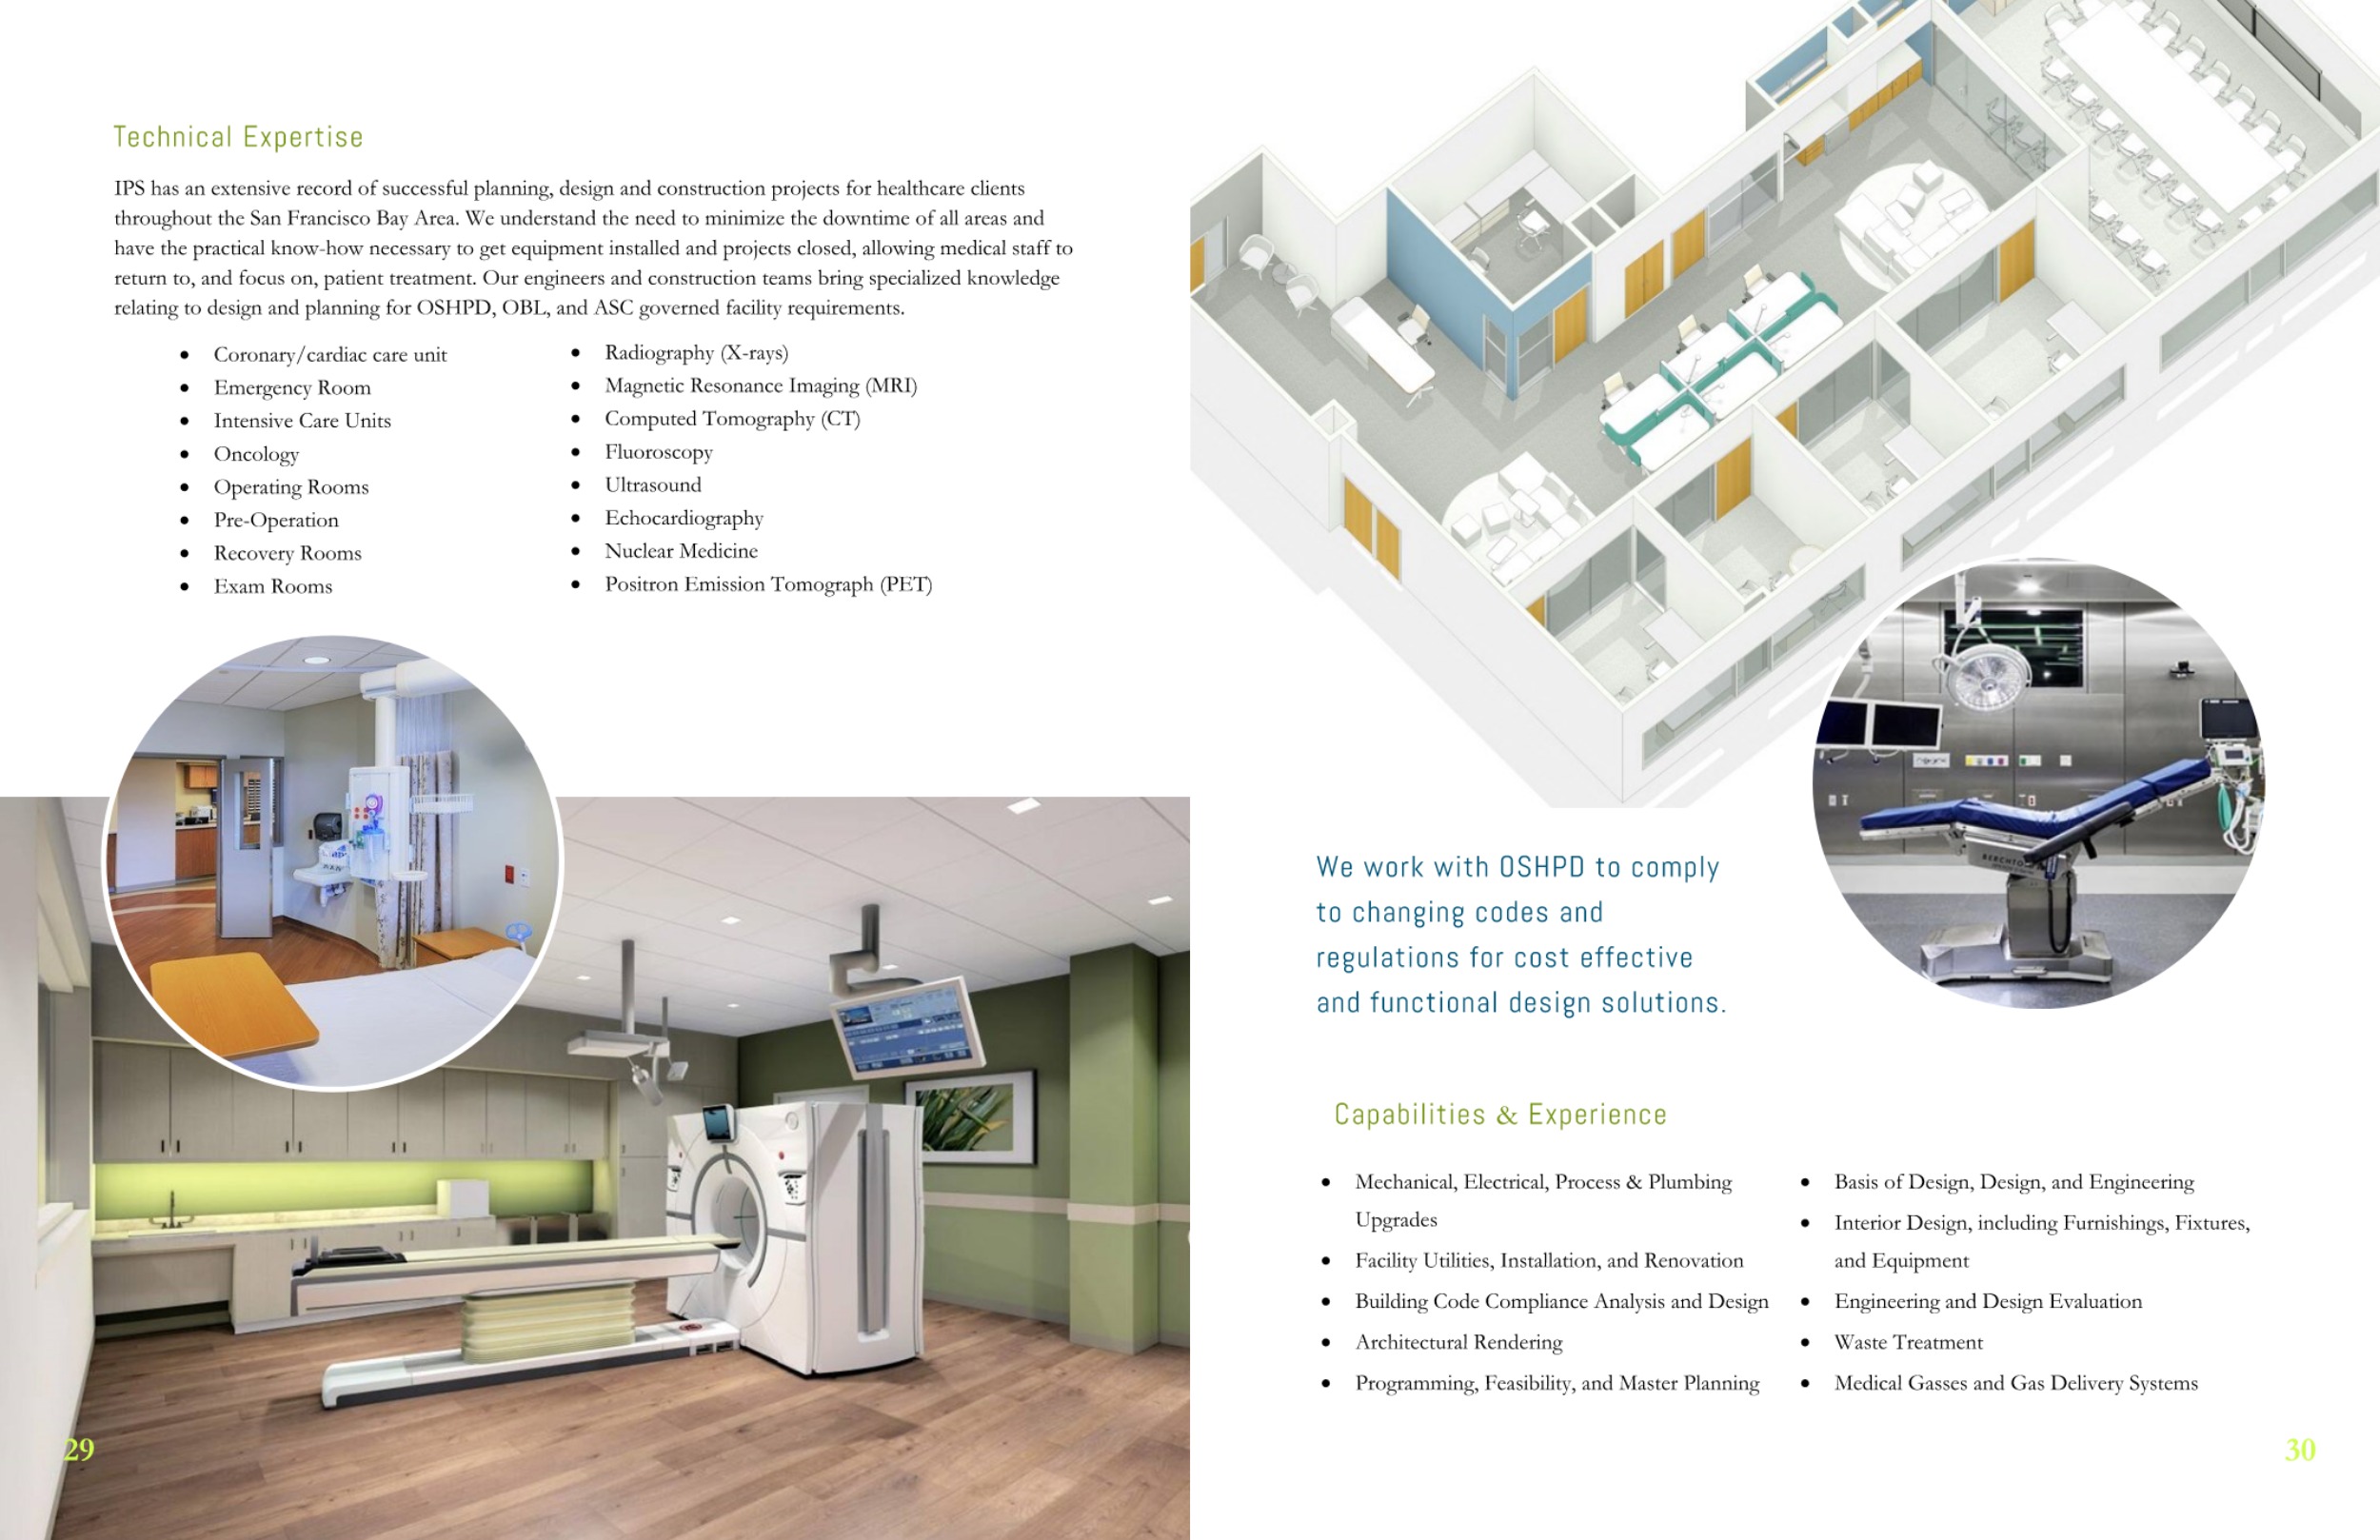 IPS Capabilities Booklet with Healthcare services, capabilities, and methods.